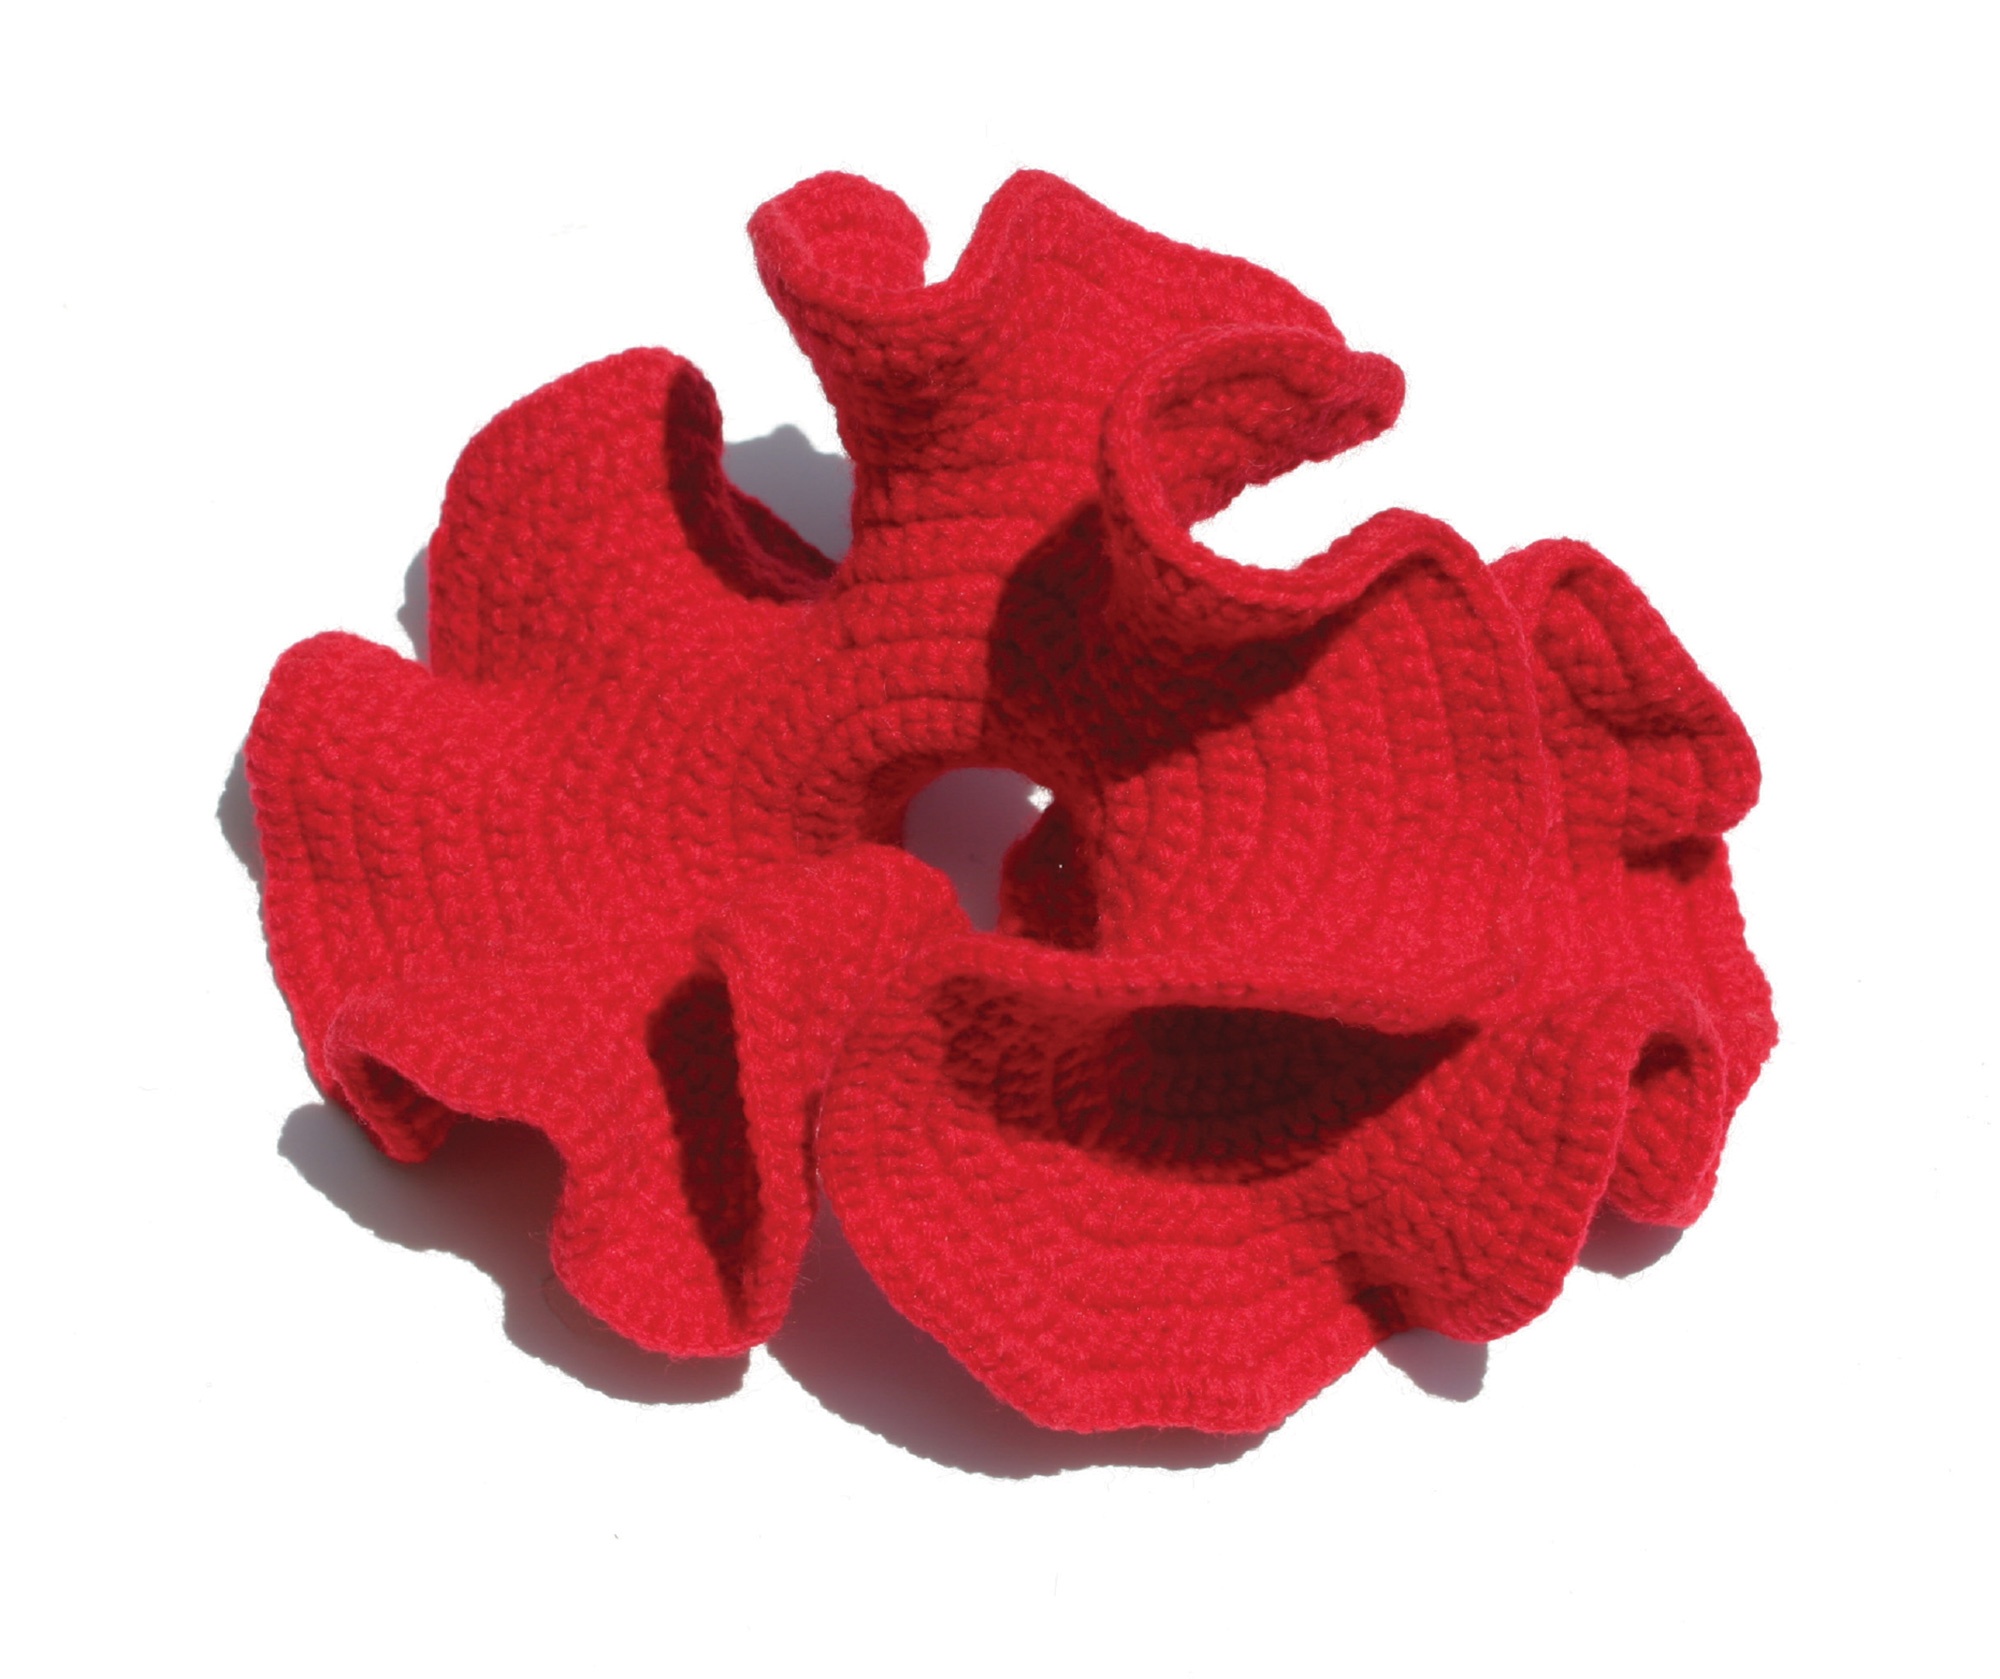 Crocheted model of pseudosphere (the hyperbolic equiabvalent of a cone) by Daina Taimina. Photo Steve Rowell. Courtesy The Institute for Figuring.